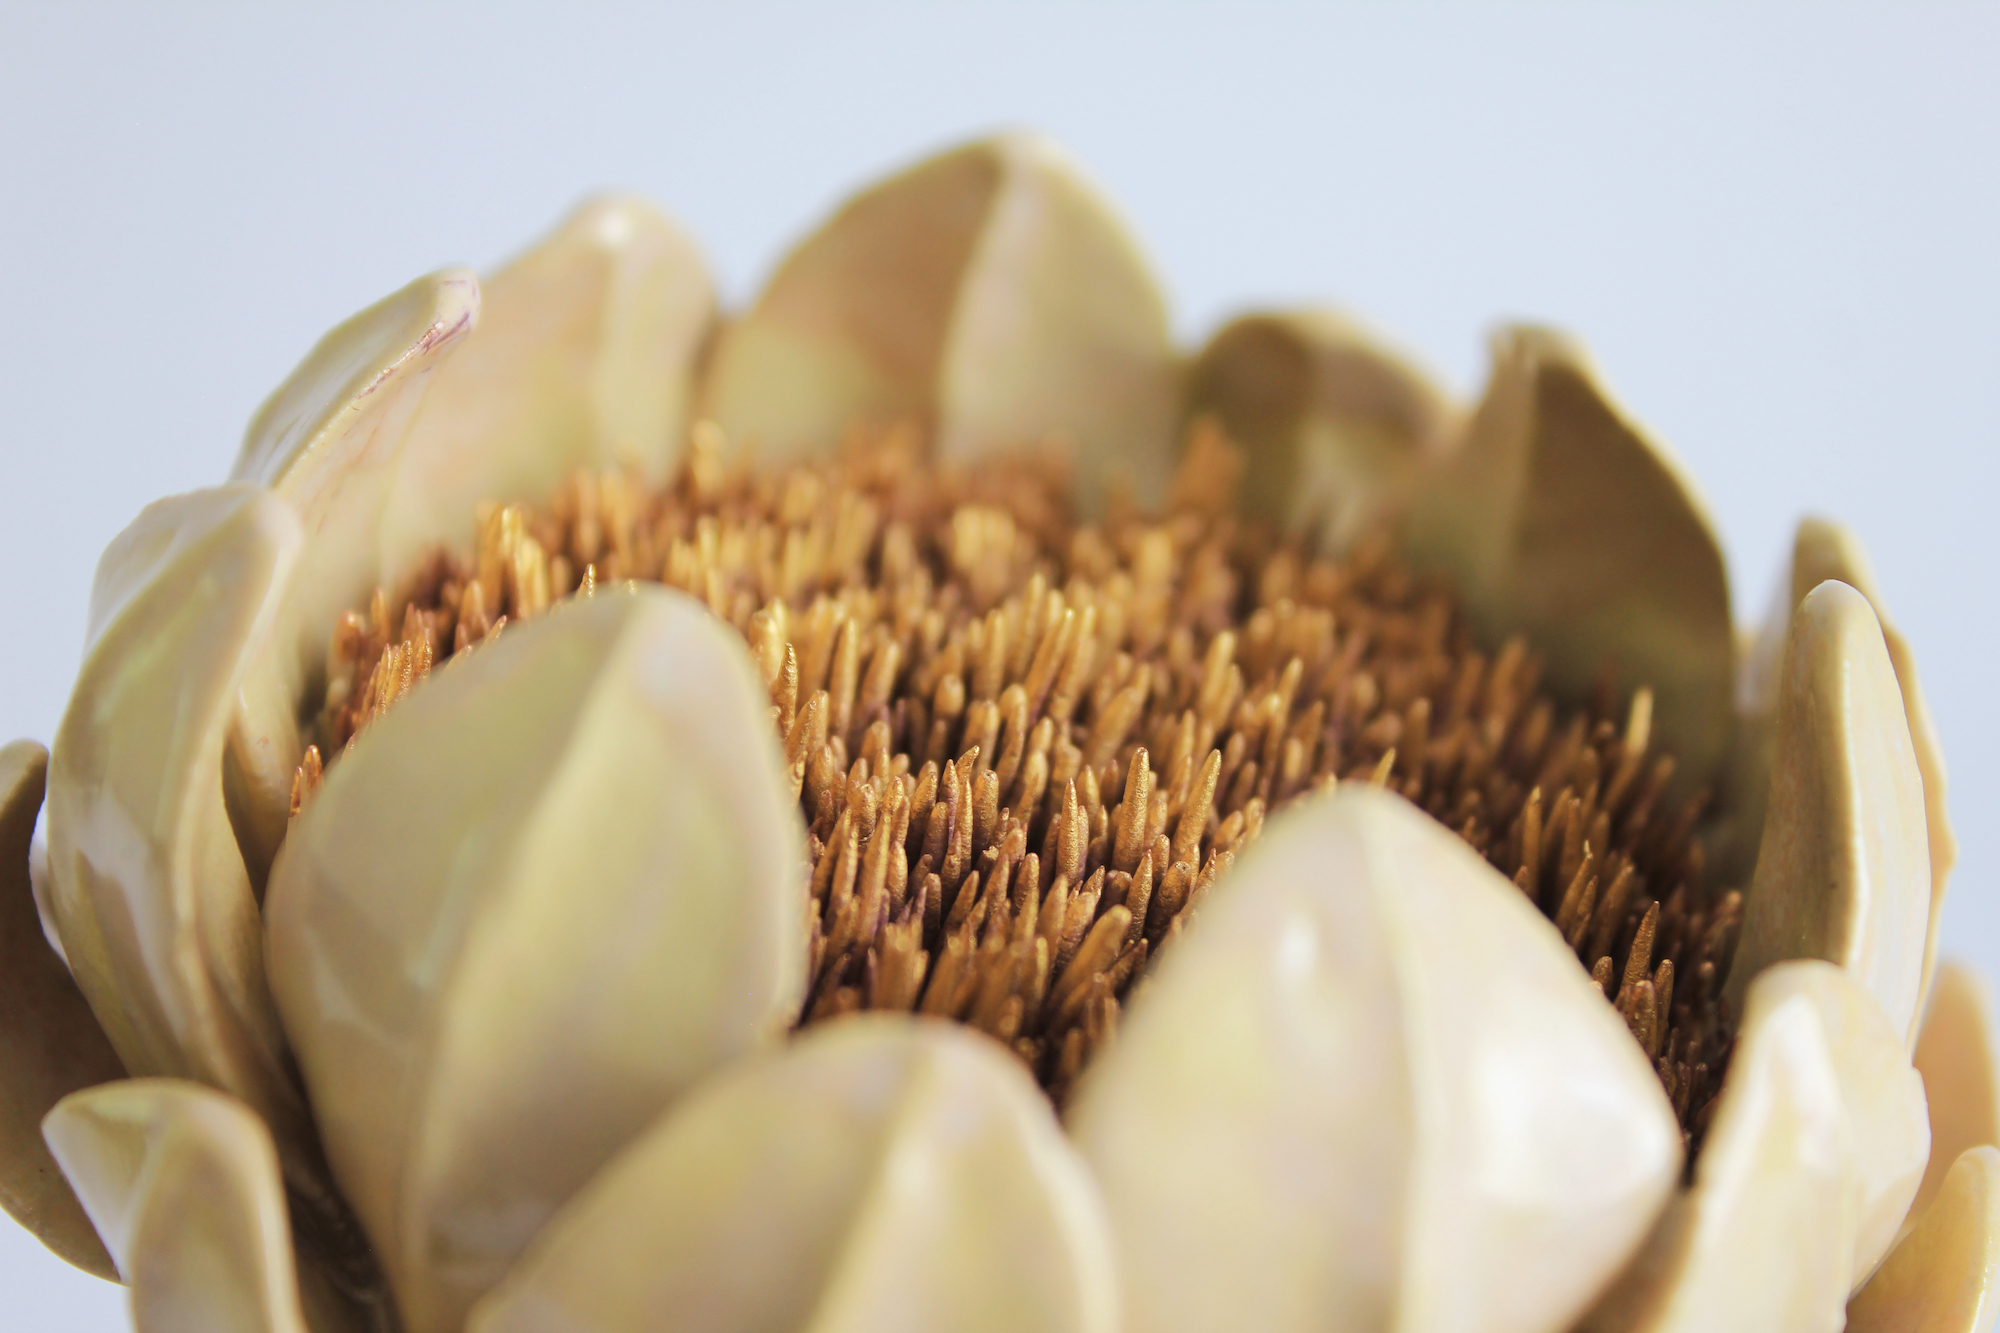 Detail of a yellow ceramic flower.